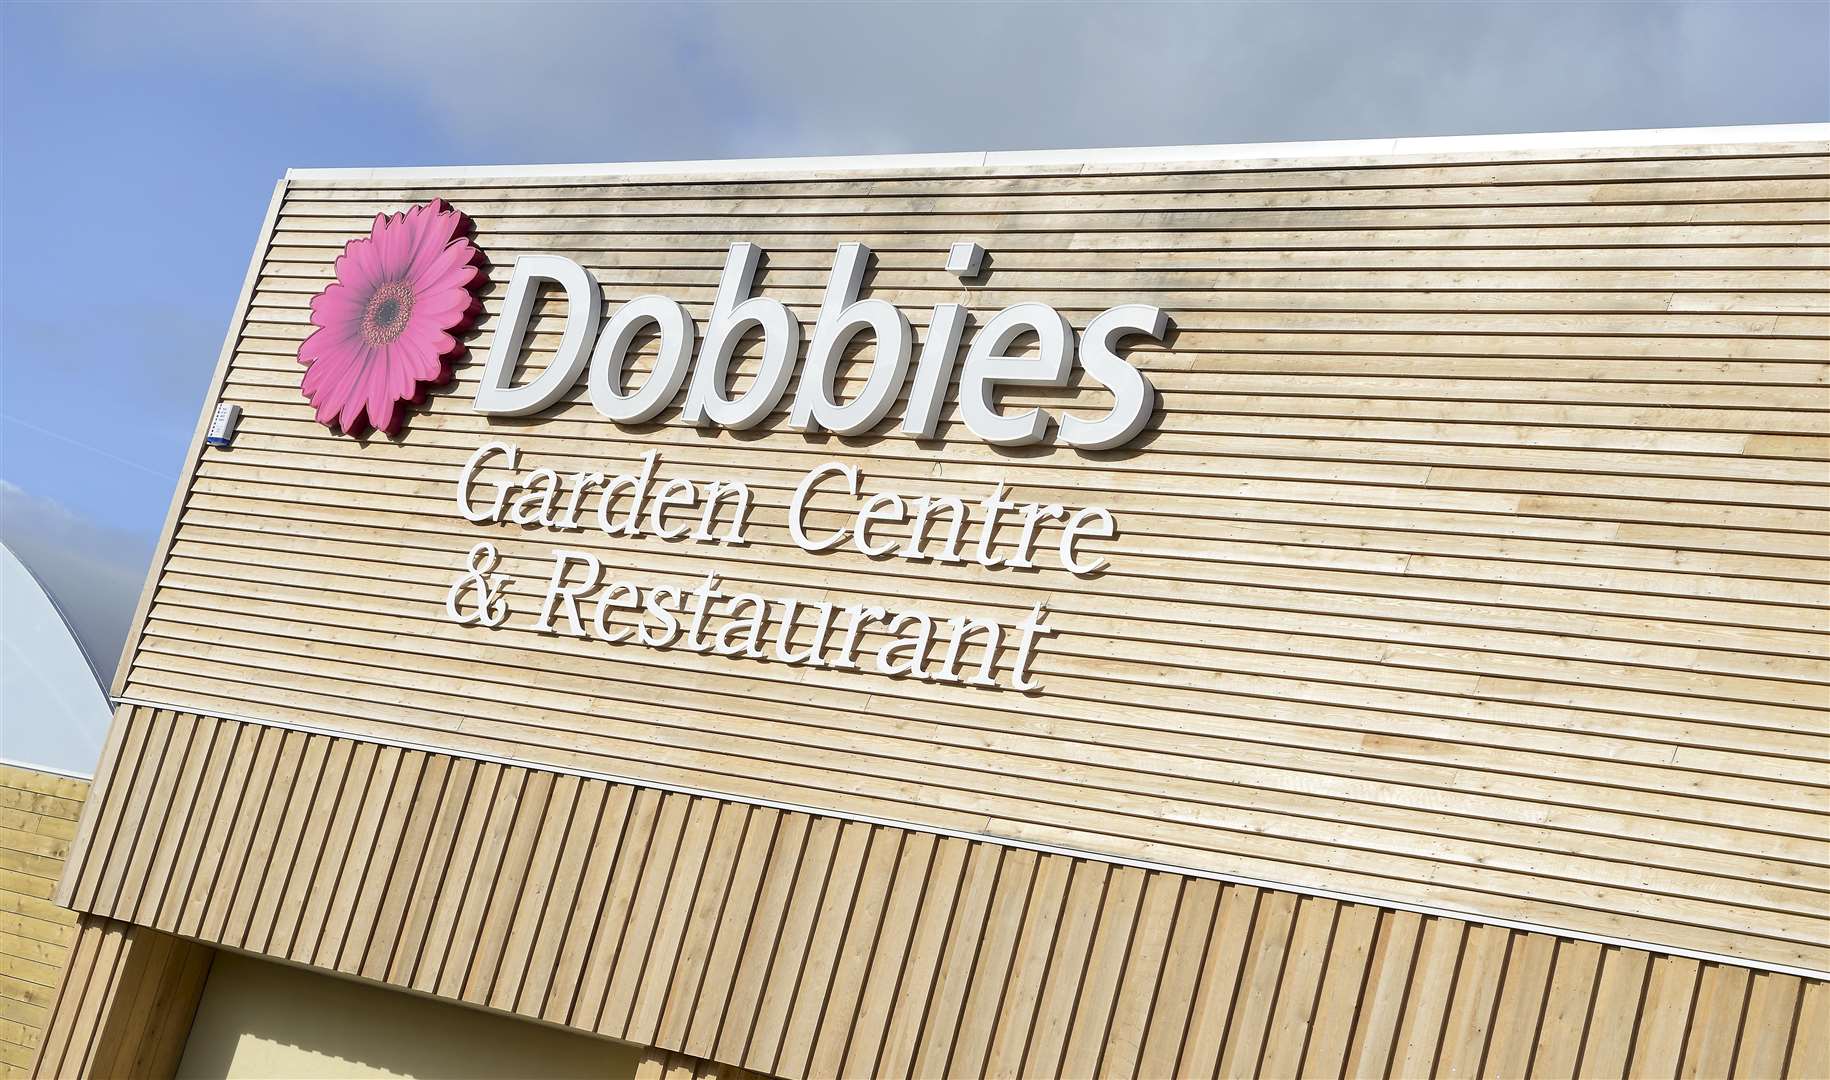 The Dobbies Garden Centre in Inverness is set to re-open.